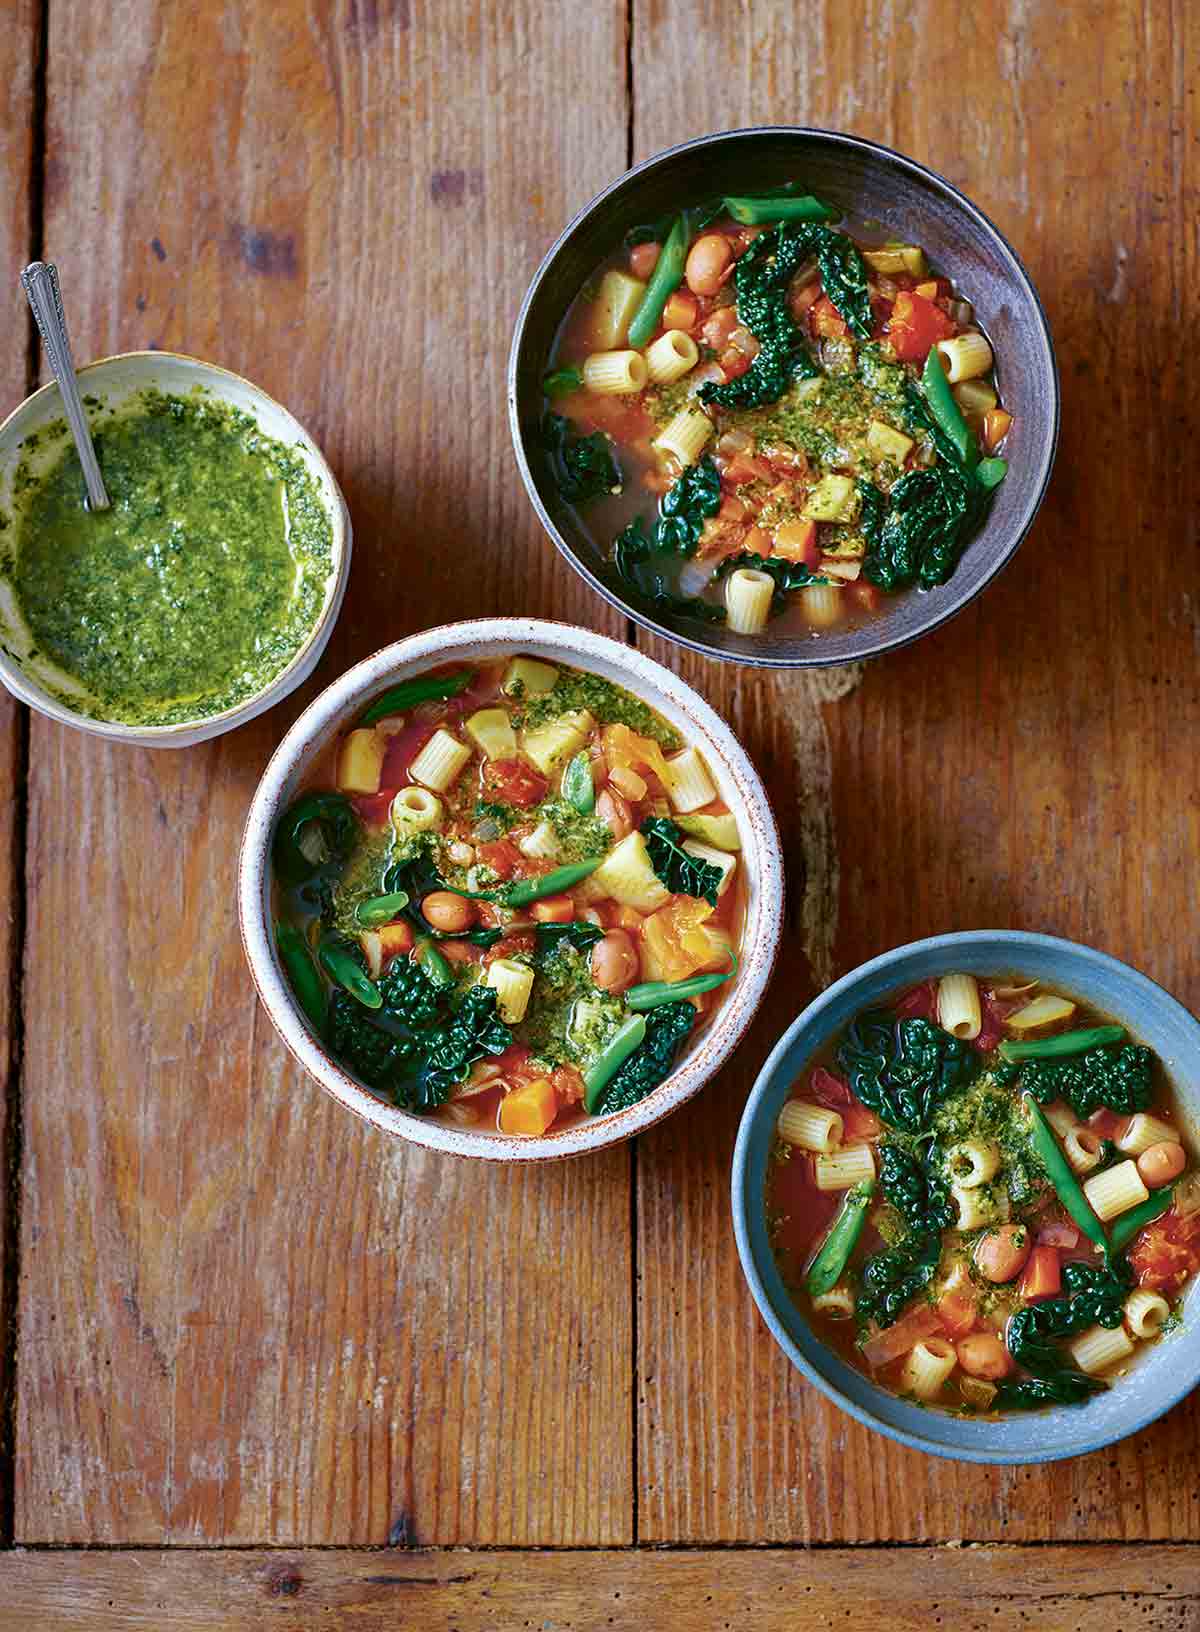 Three bowls of minestrone with a small bowl of pesto on the side.